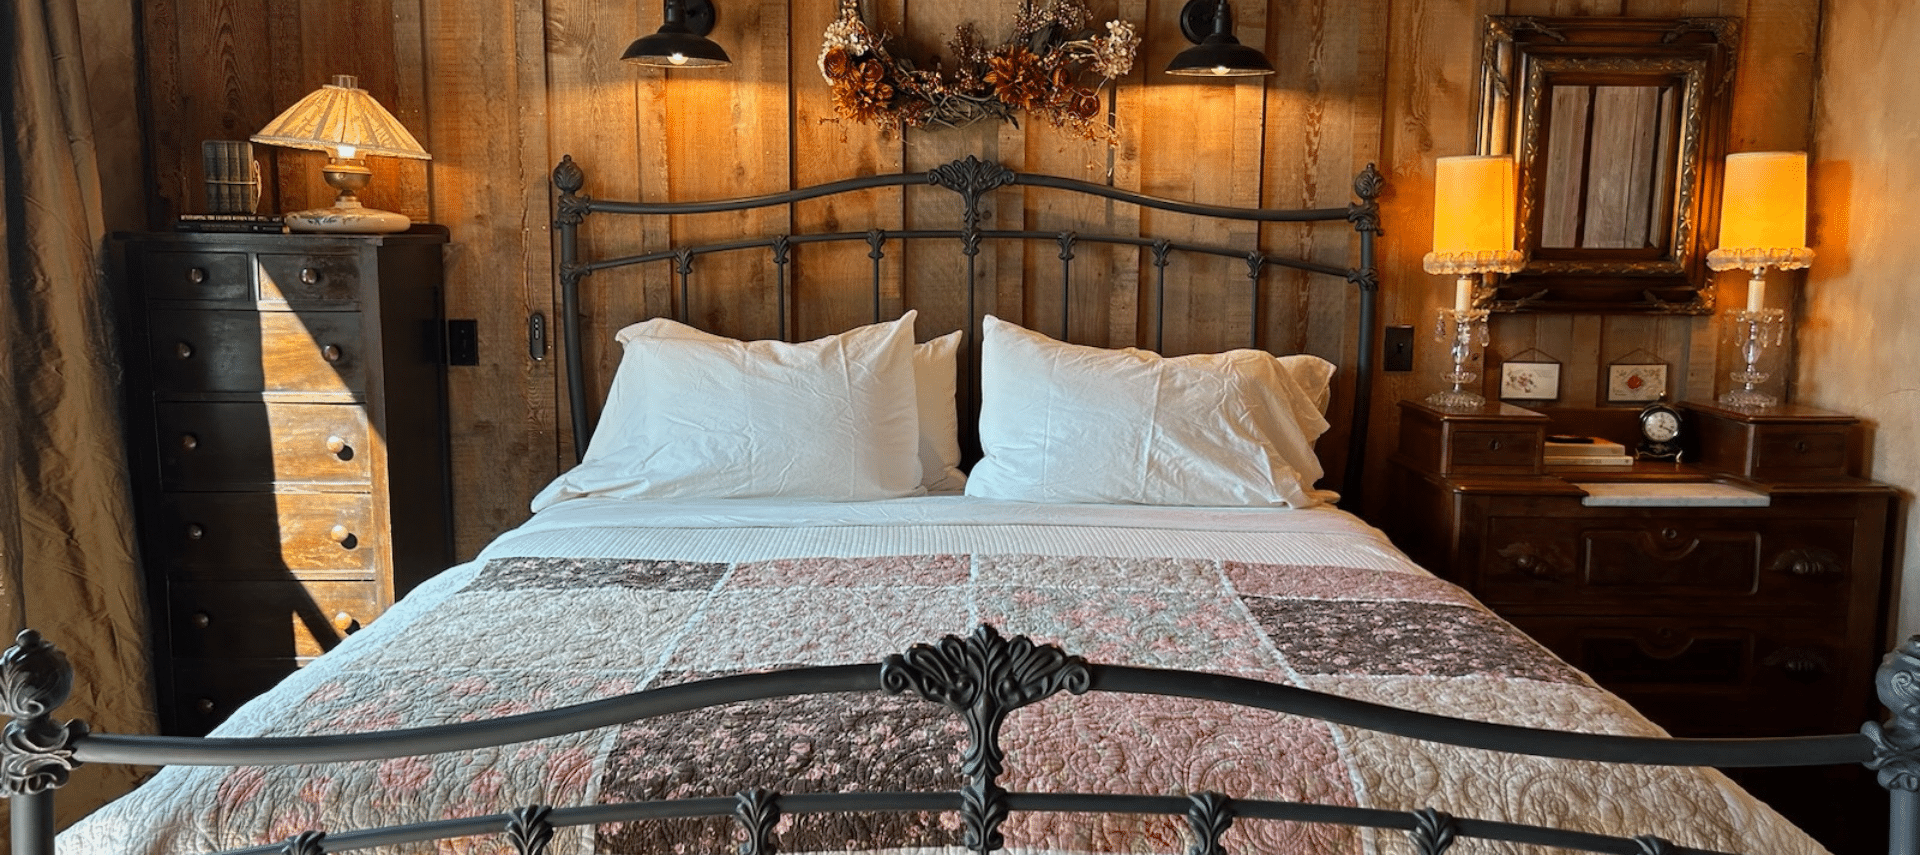 Image of King Bed against barnwood wall and beautiful quilt at foot of bed in The Granary Room accommodations at Inn at Sunset Mill Ranch in Wimberley Texas